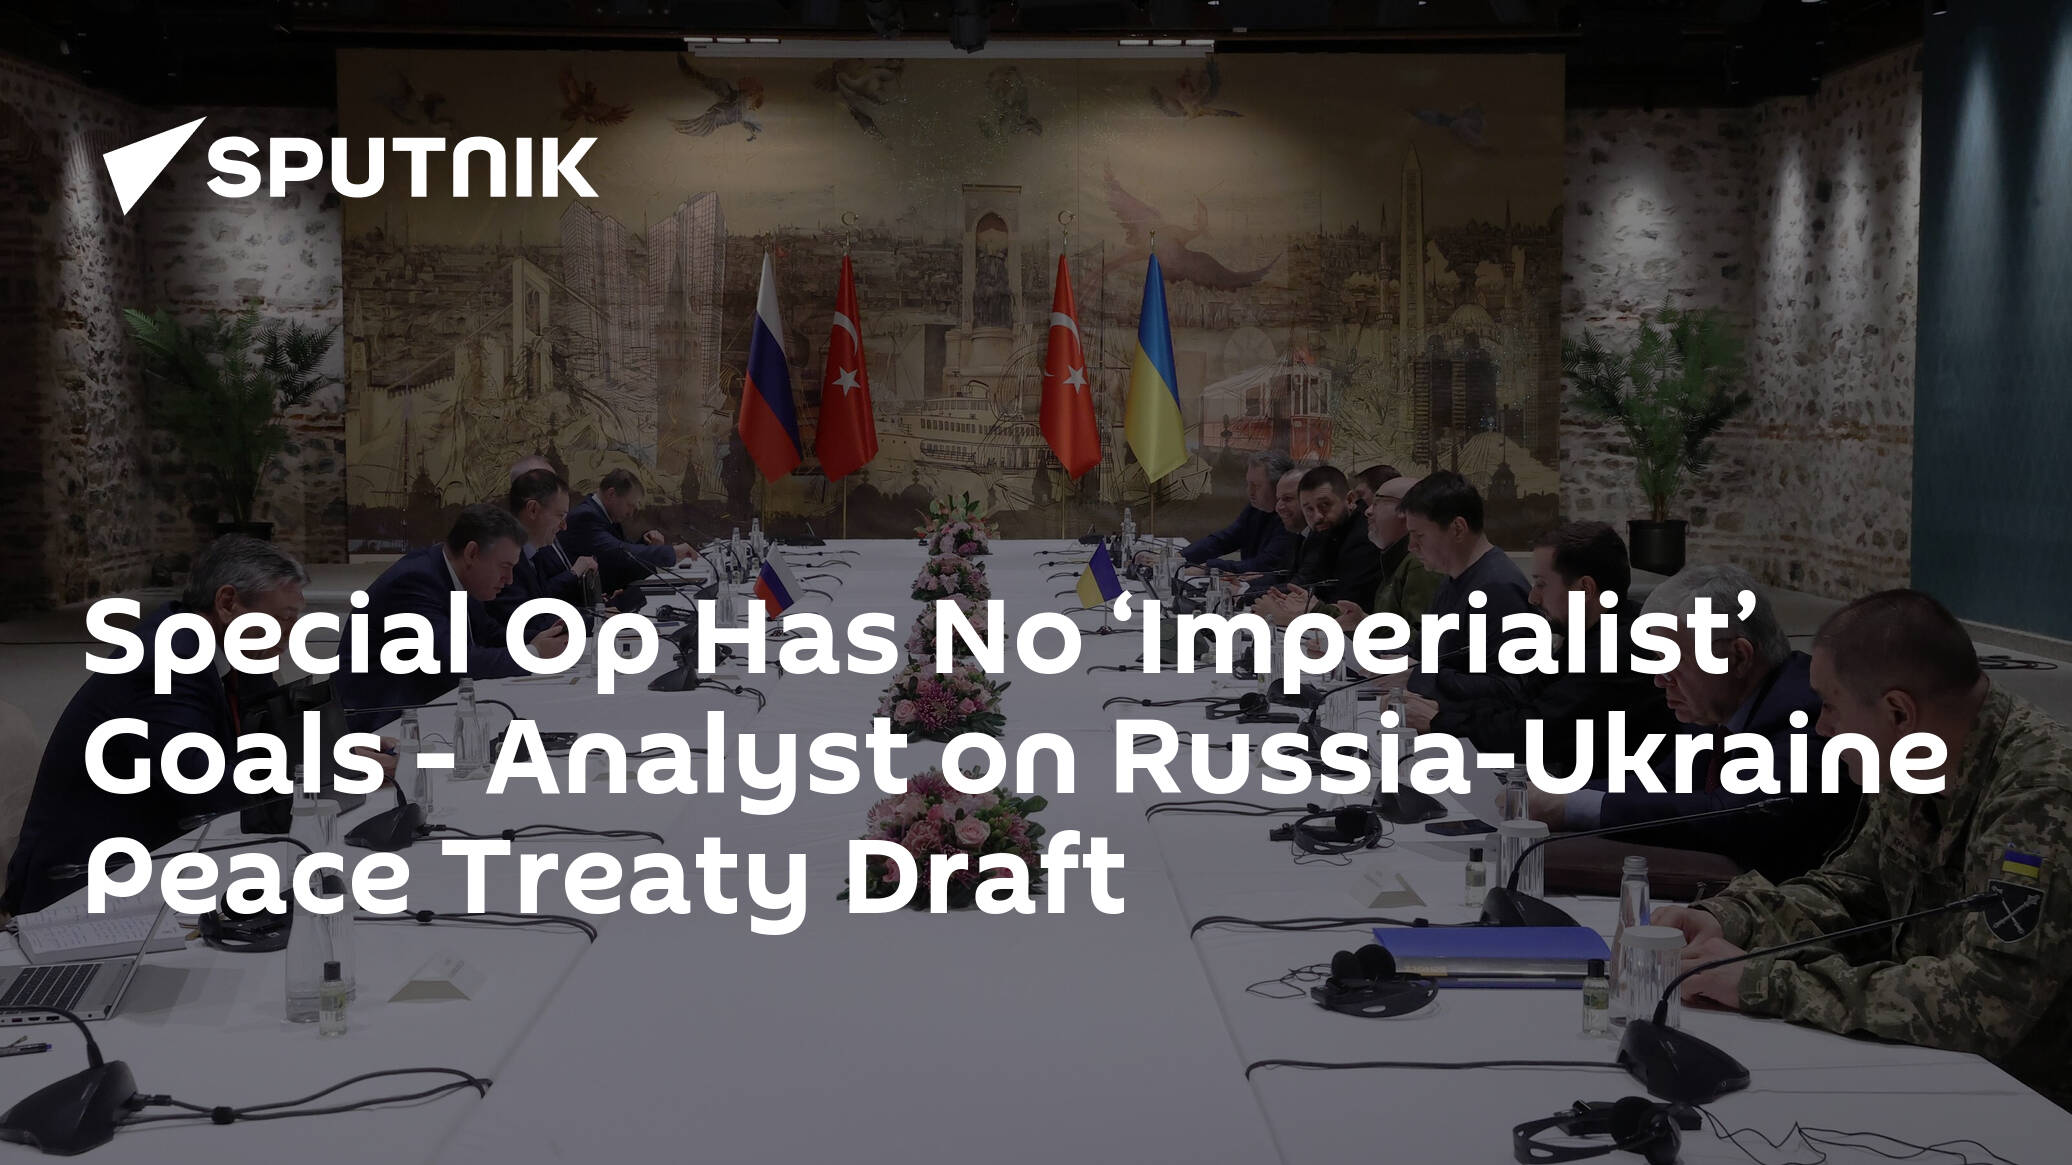 Special Op Has No ‘Imperialist’ Goals – Analyst on Russia-Ukraine Peace Treaty Draft